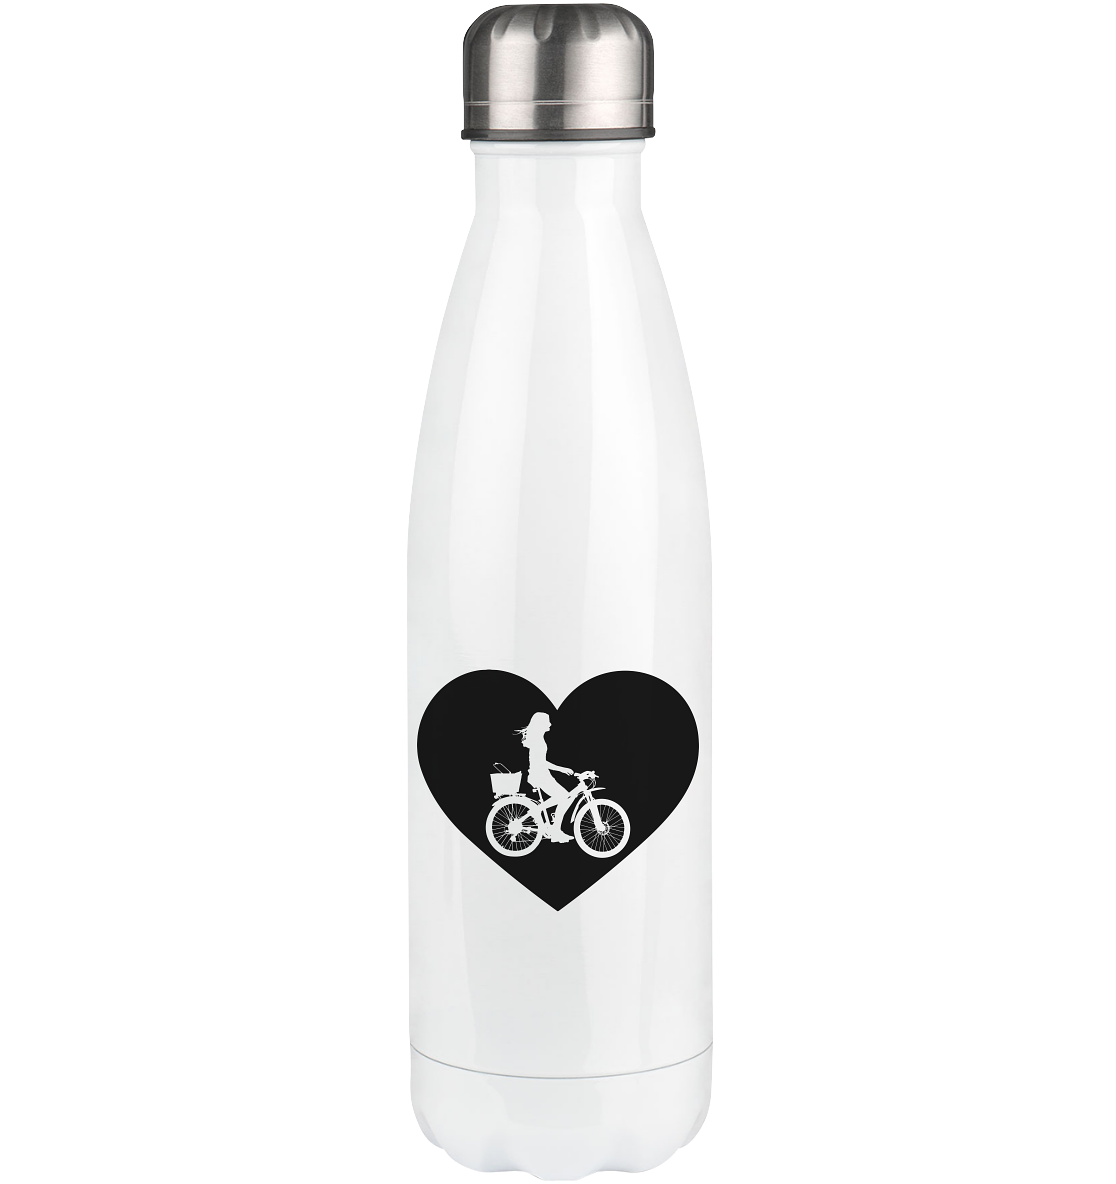 Heart 1 and Cycling - Edelstahl Thermosflasche fahrrad 500ml